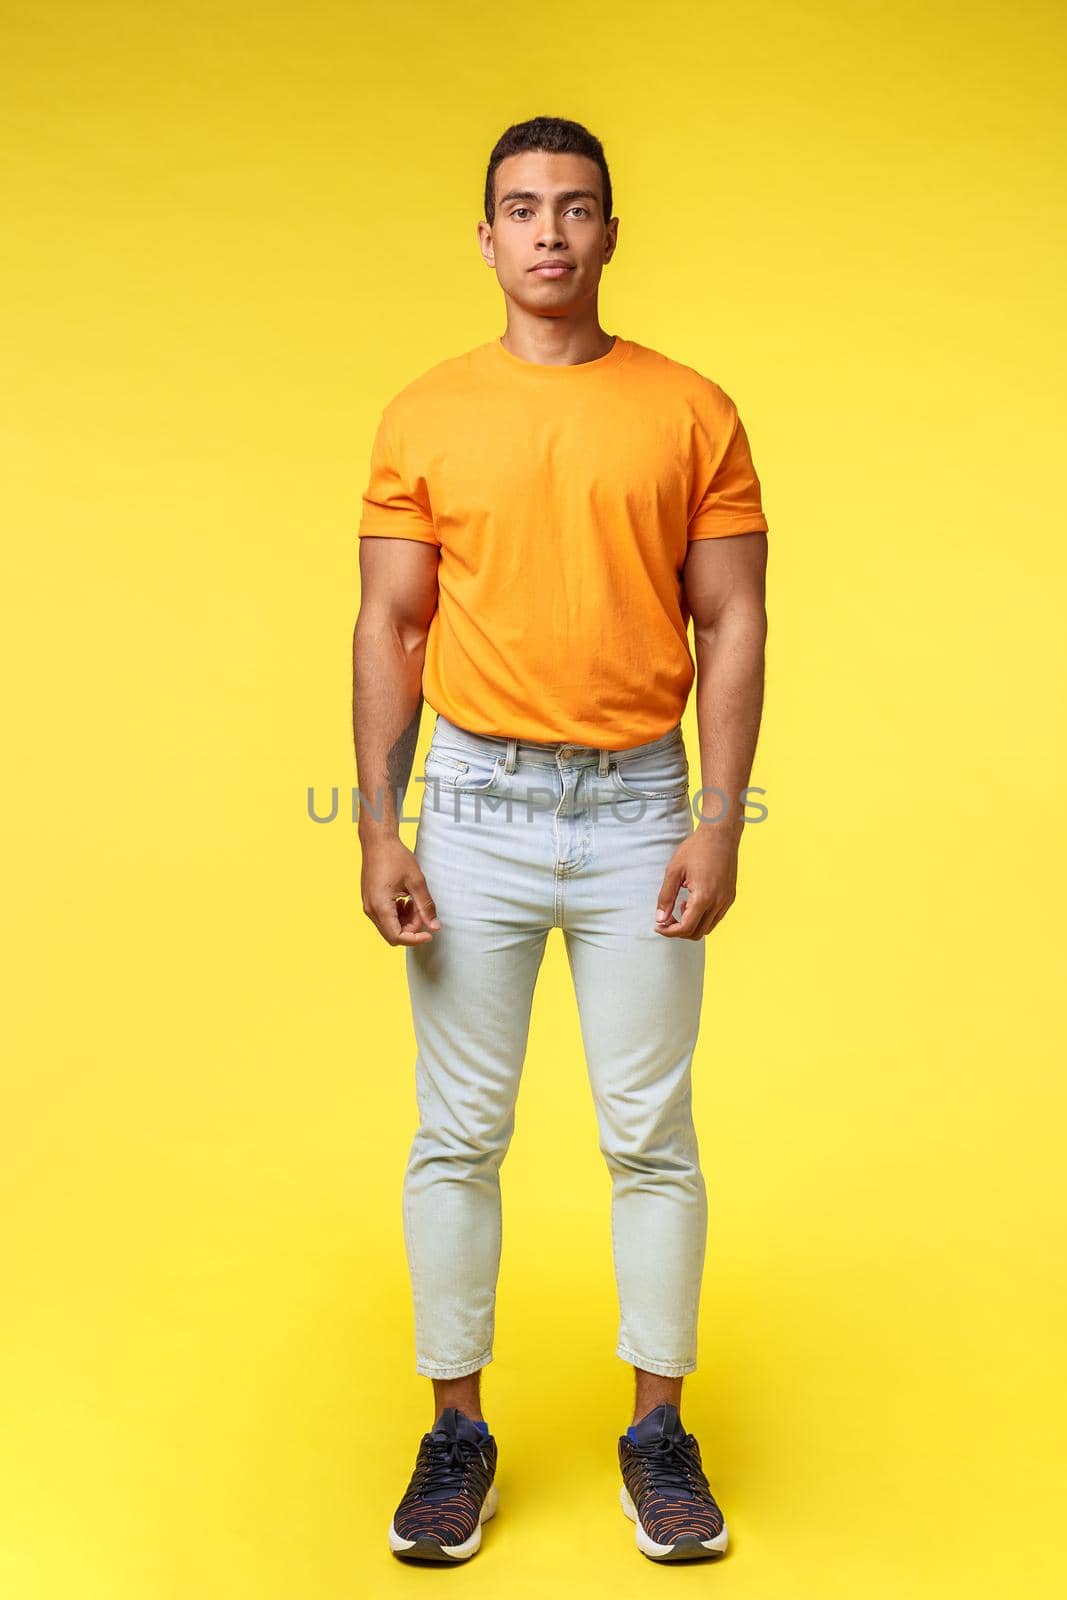 Full-length vertical shot masculine hipster guy, hispanic ethnicity, standing casually yellow background, wear stylish orange t-shirt, white pants, look camera with no expression, slightly smiling.